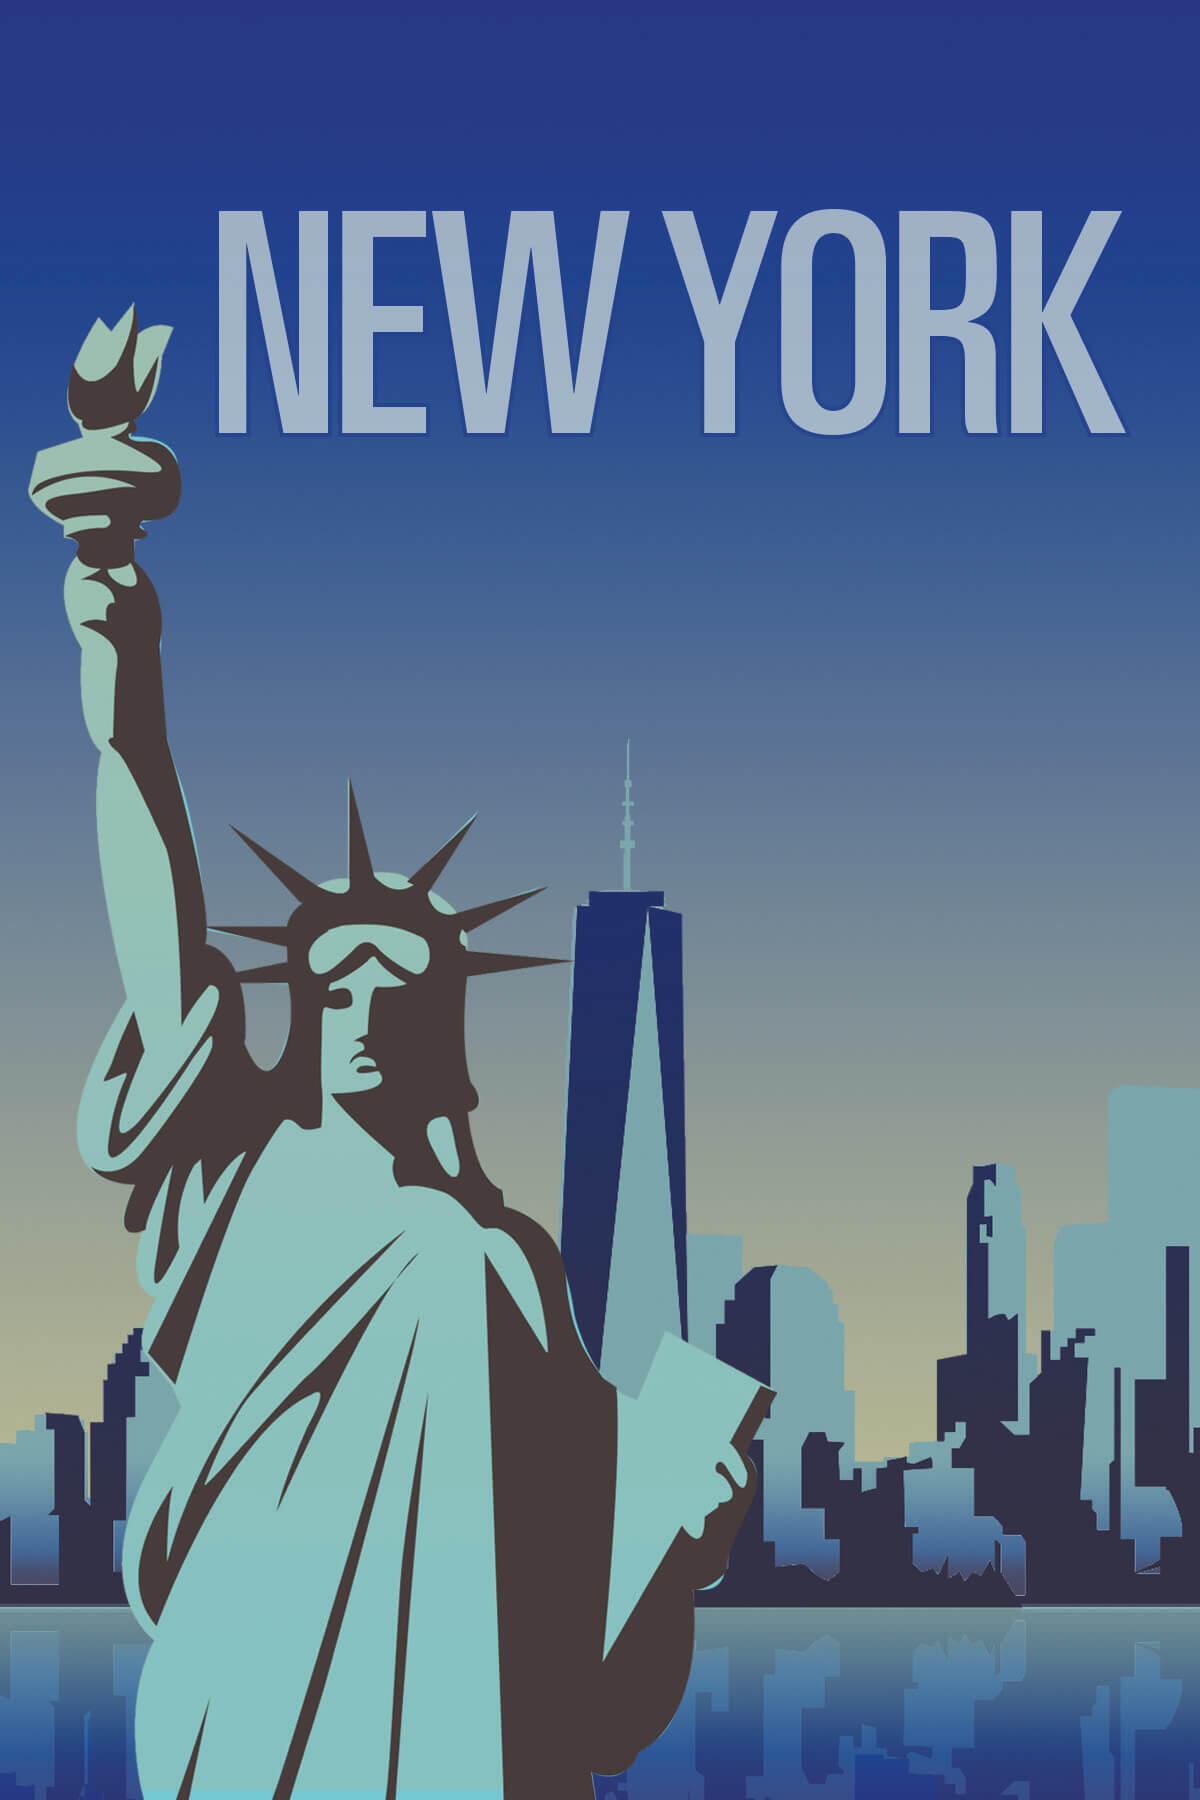 New York travel poster showing Statue of Liberty.